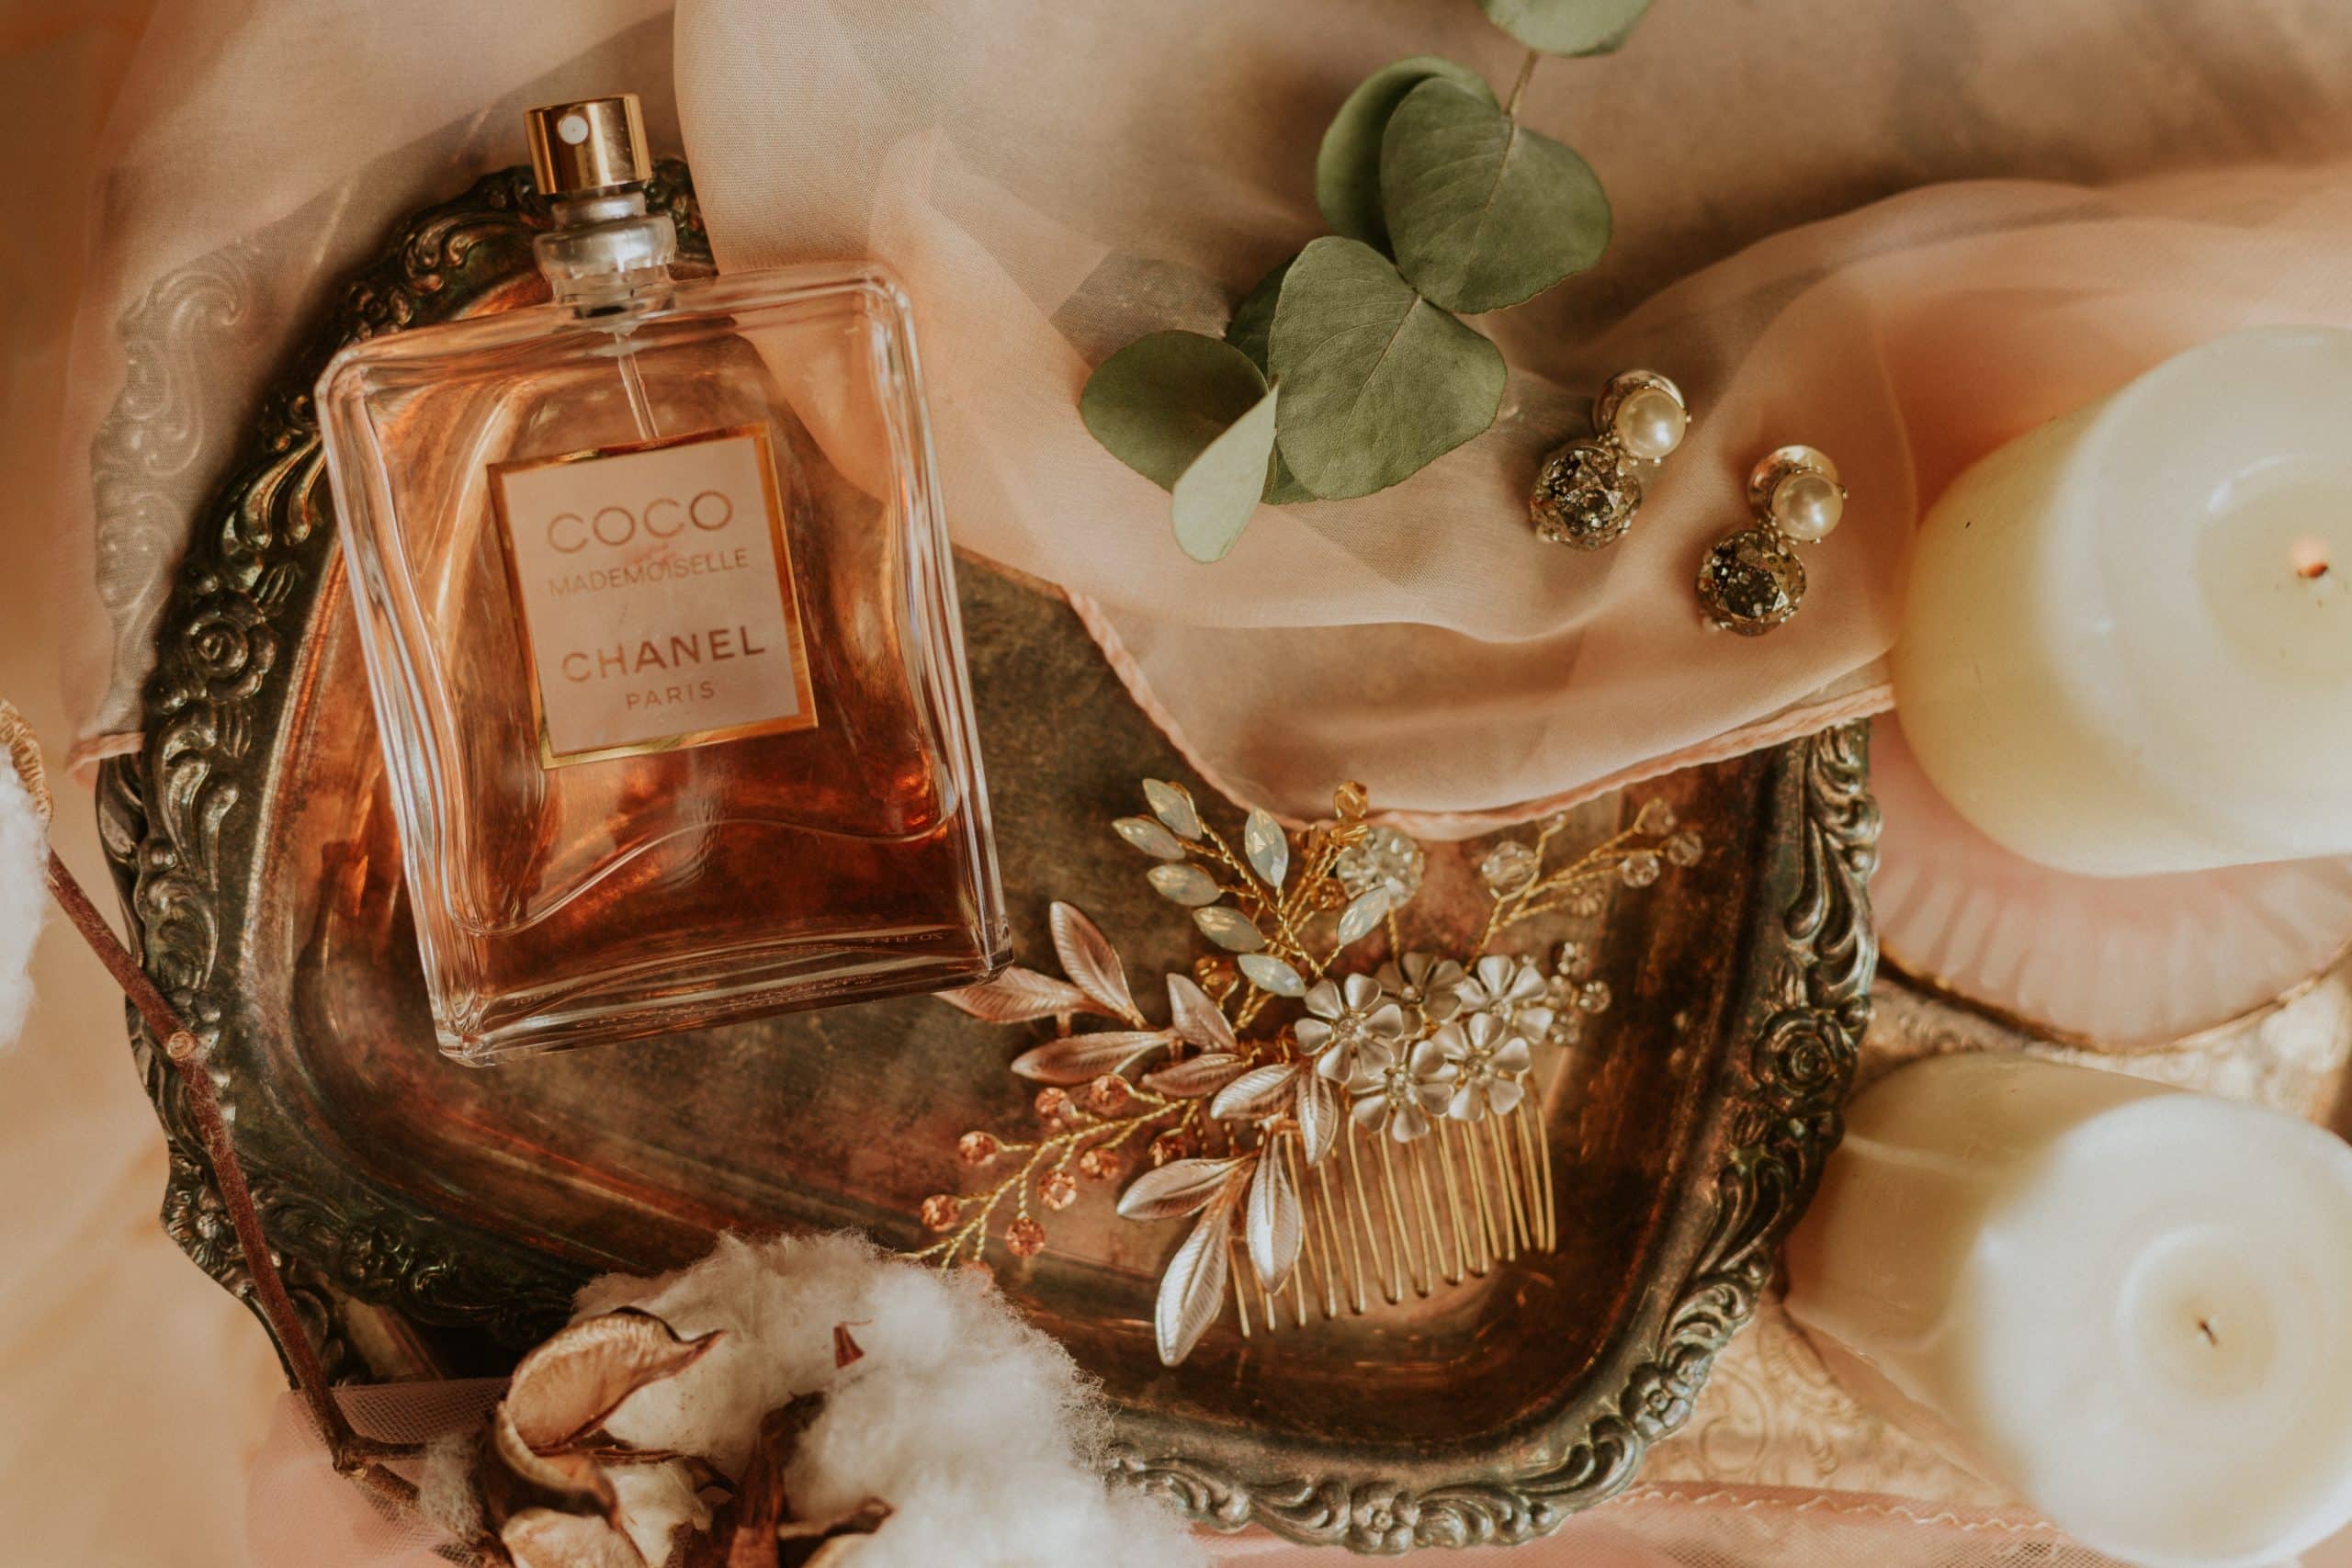 The bottles of these perfumes will delight you. Discover our favourites from leading brands